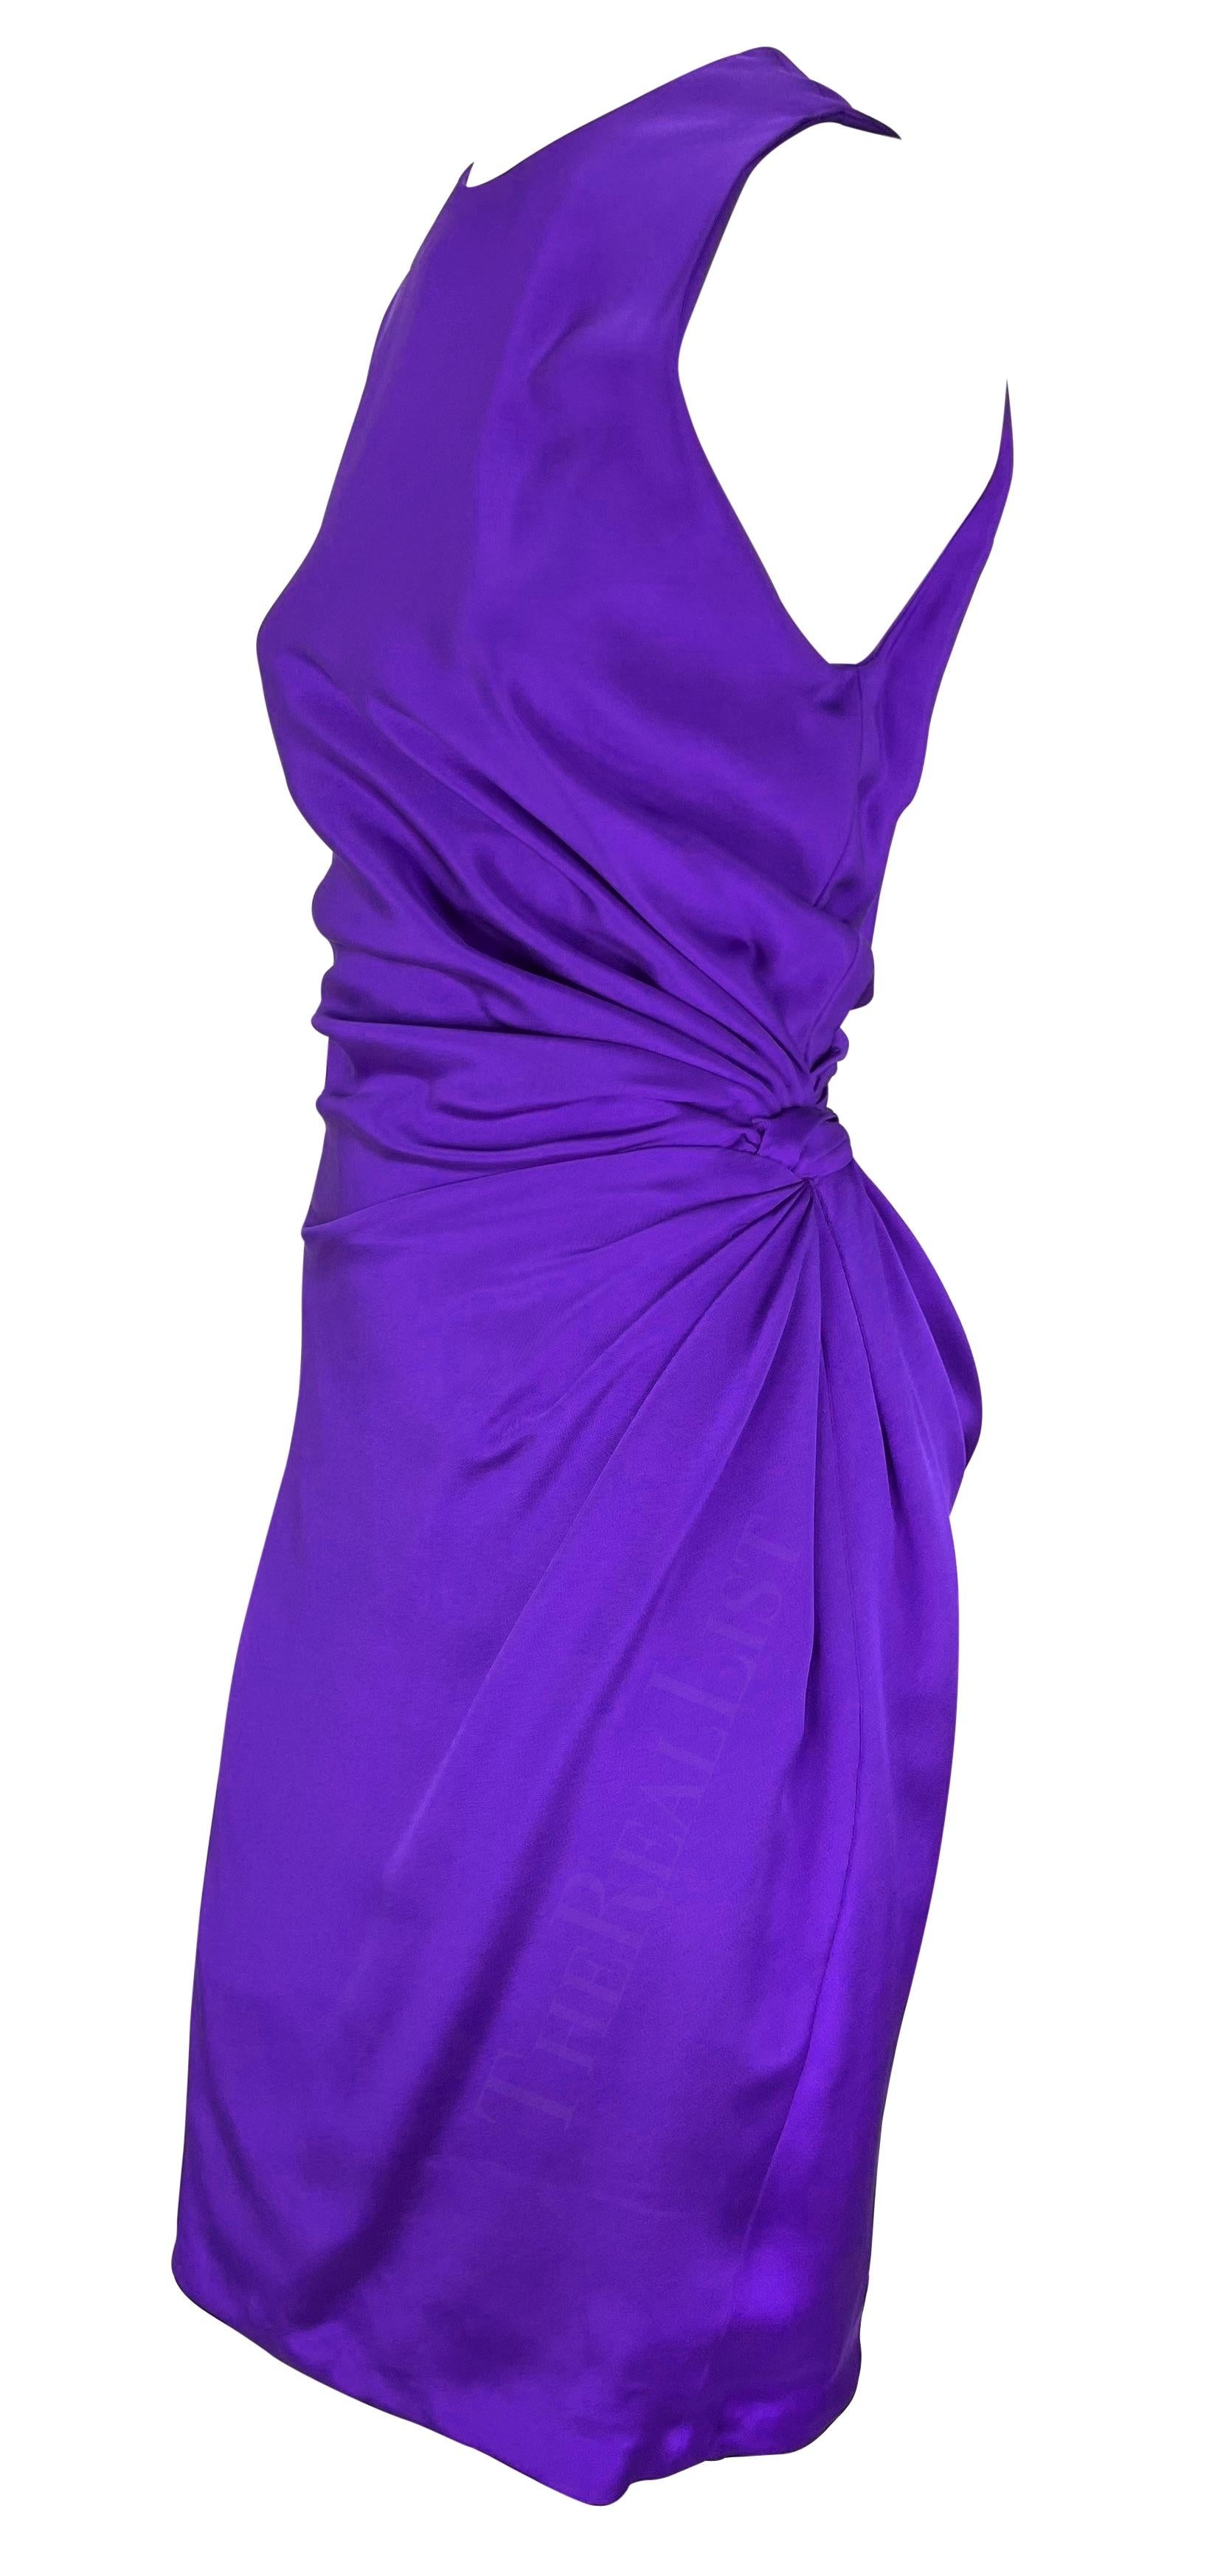 Presenting a vibrant purple Gianni Versace midi dress, designed by Gianni Versace. From the Spring/Summer 1991 collection, this dress features a crew neckline and button closures at one shoulder. The dress is made complete with a knot design at one